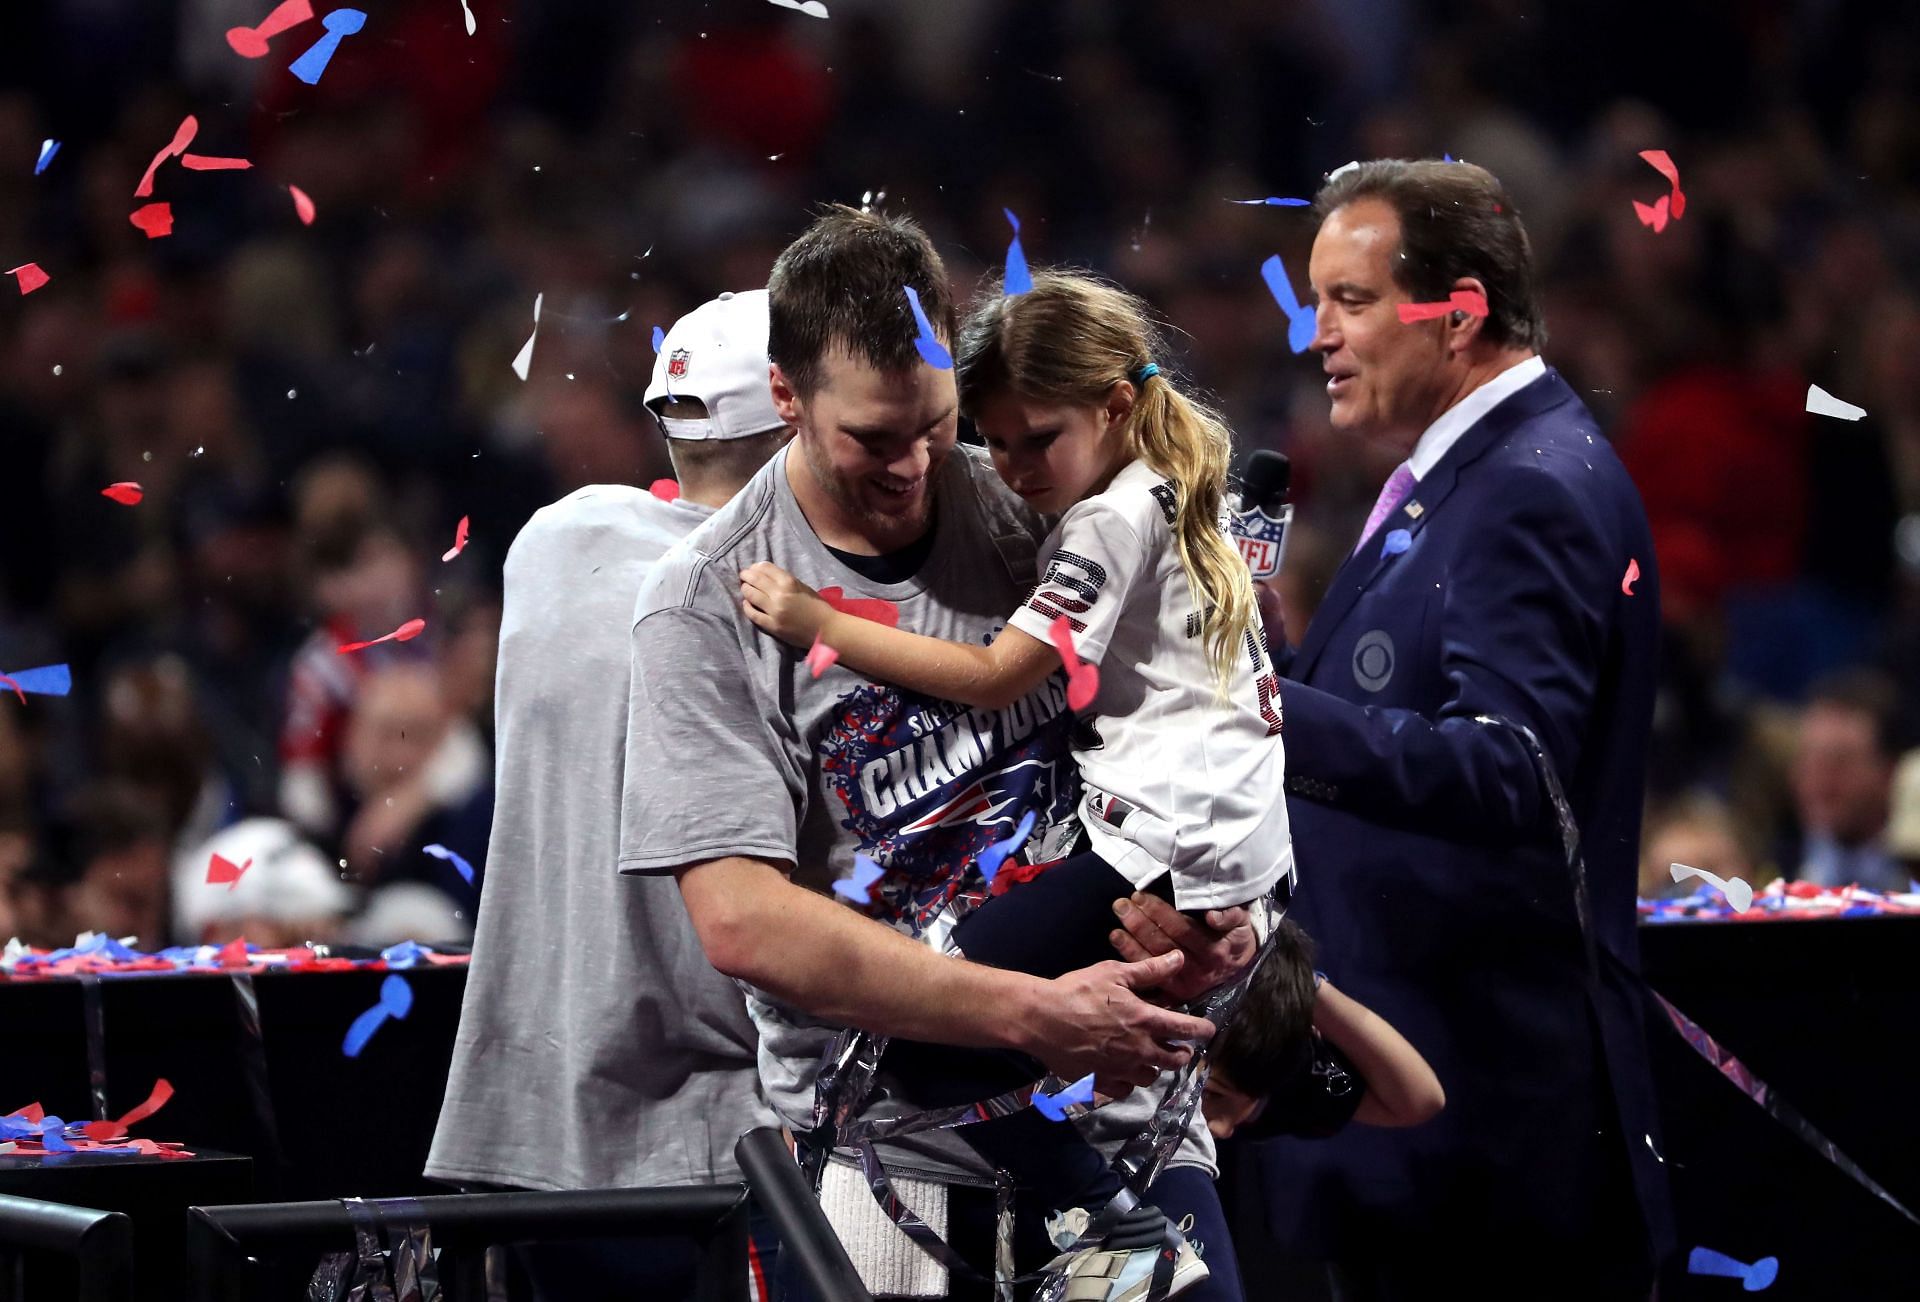 Tom Brady turns back time with Patriots era picture of daughter Vivian